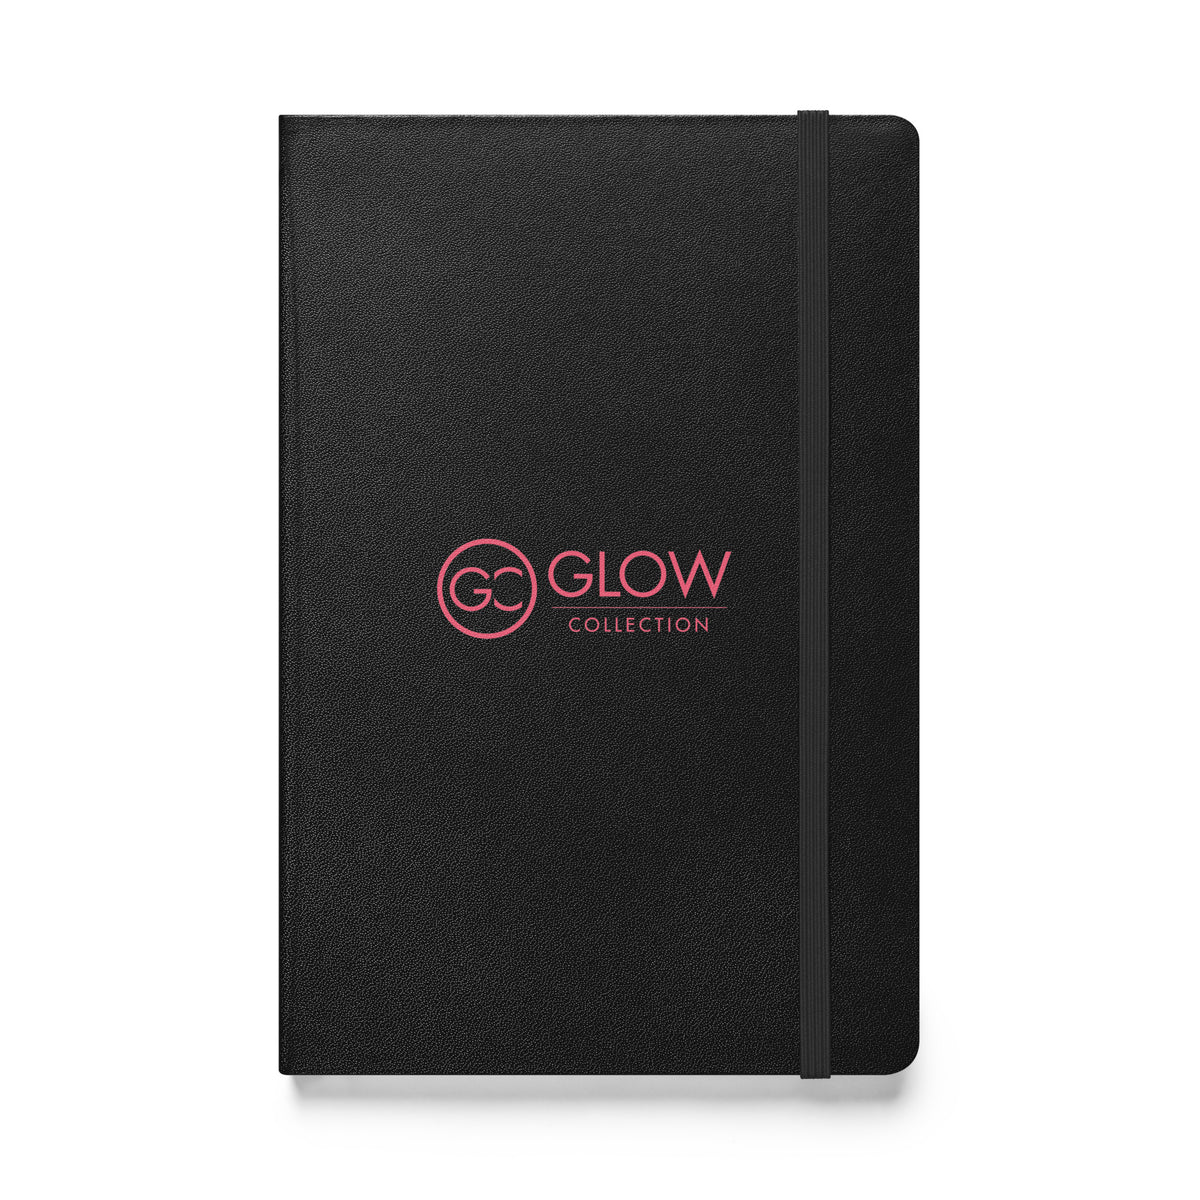 Glow Collection Hardcover bound notebook